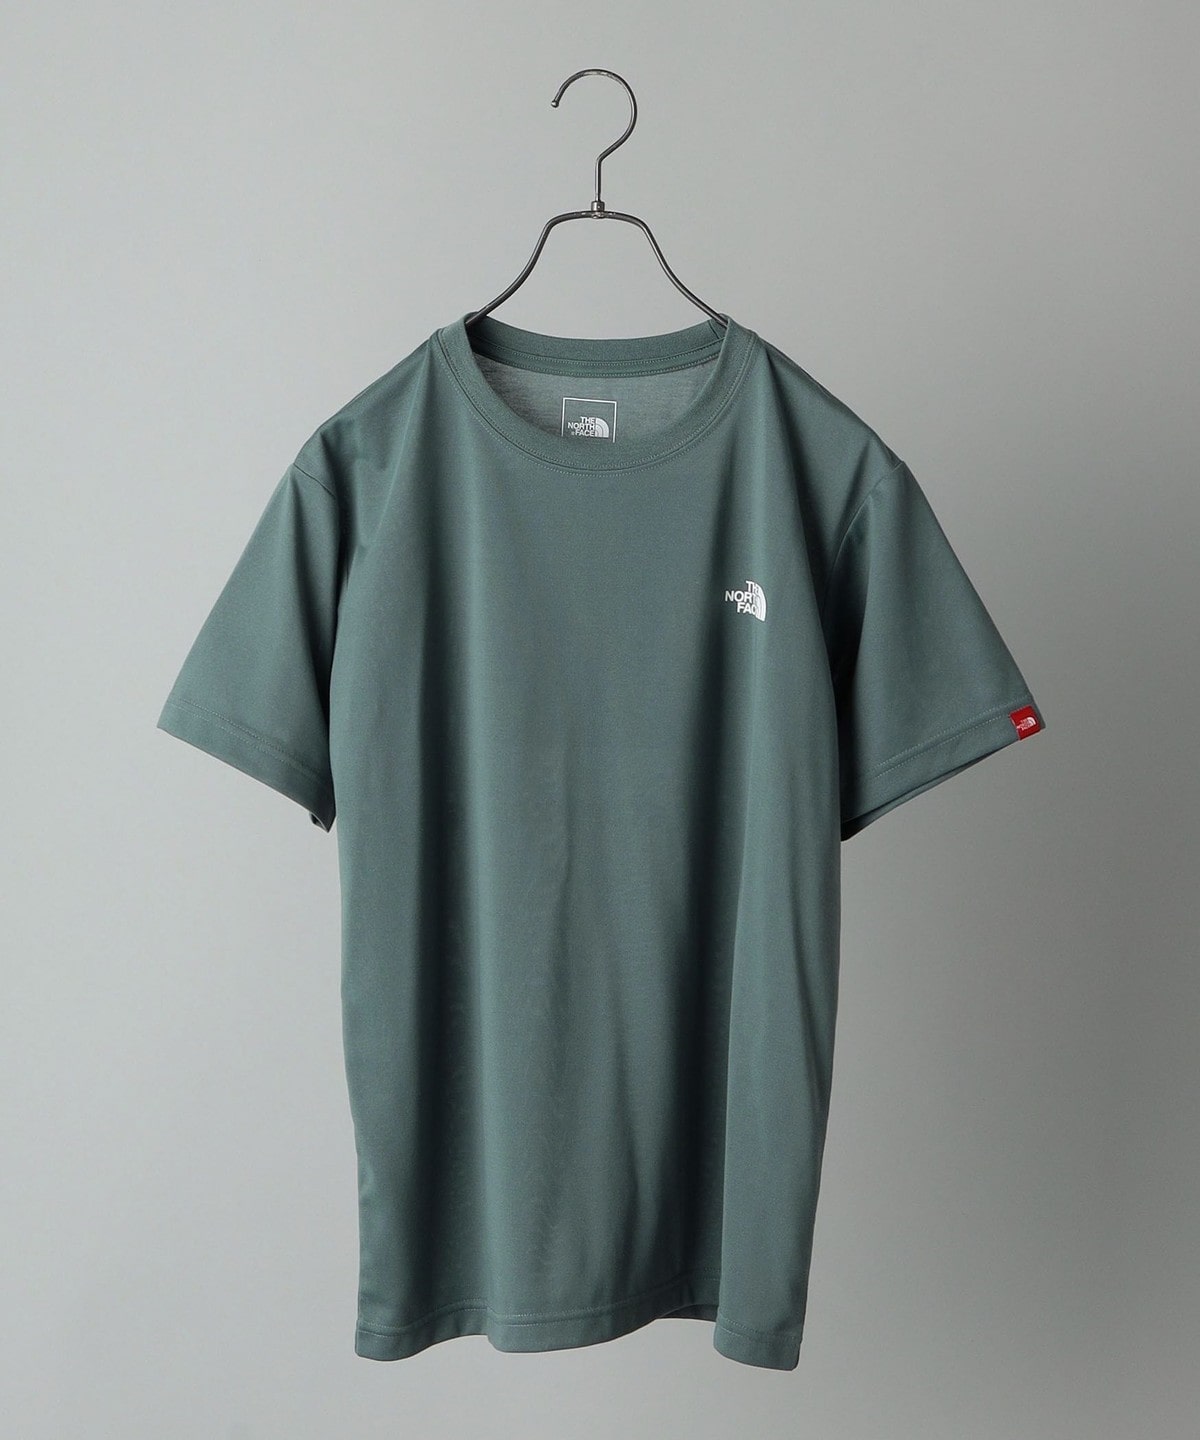 THE NORTH FACE: S/S SQUARE CAMOUFLAGE Tシャツ ライトブルー